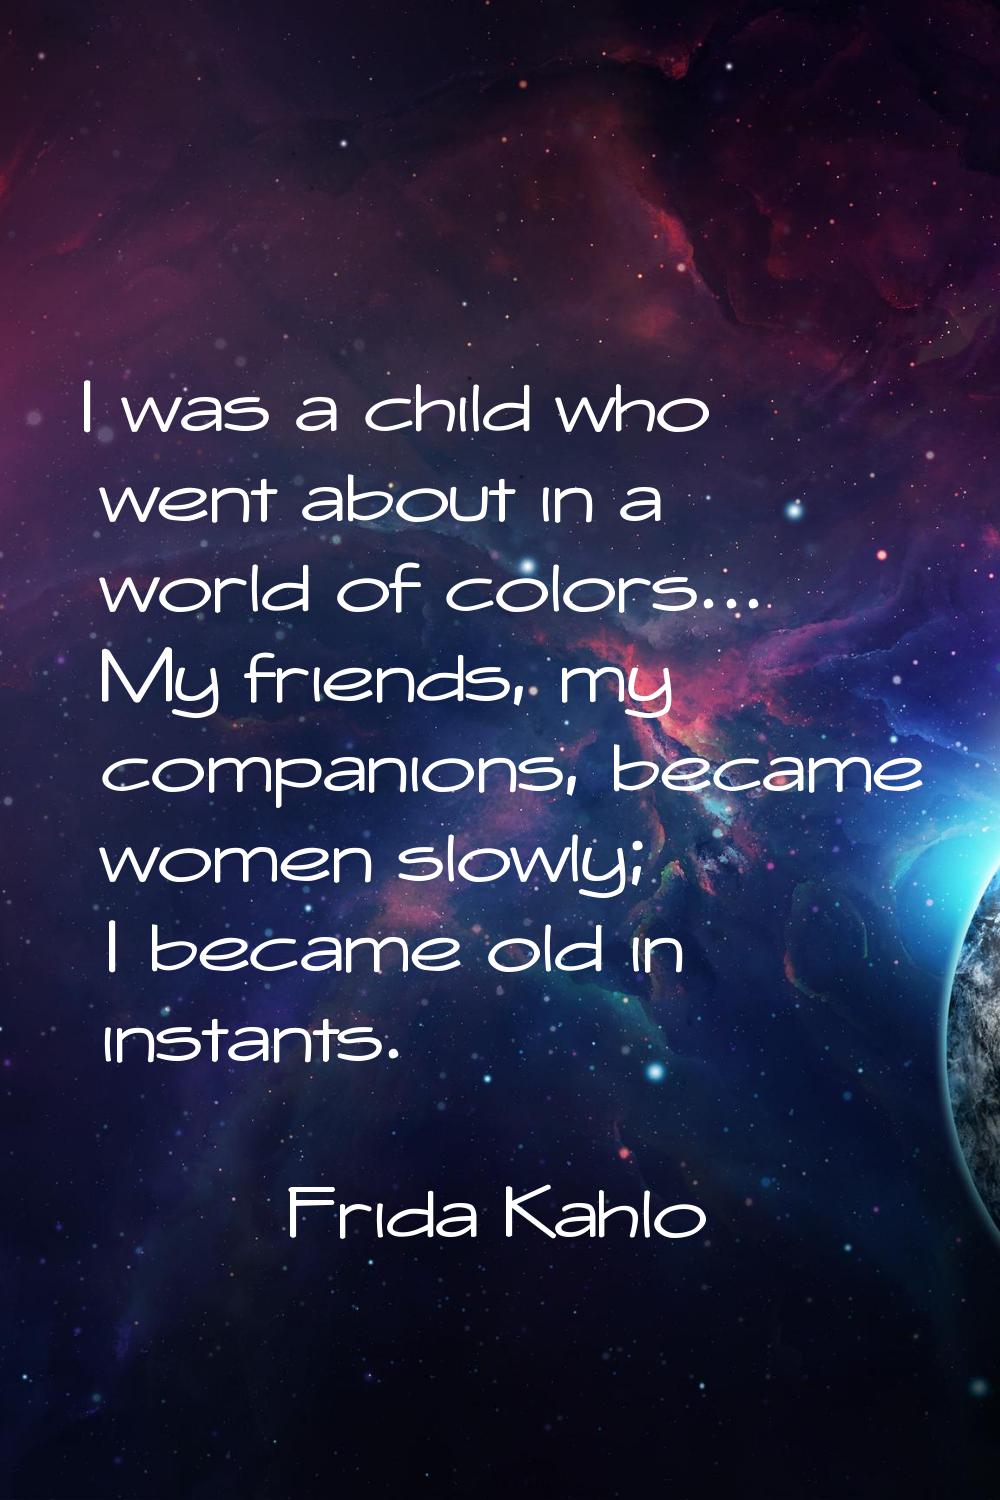 I was a child who went about in a world of colors... My friends, my companions, became women slowly